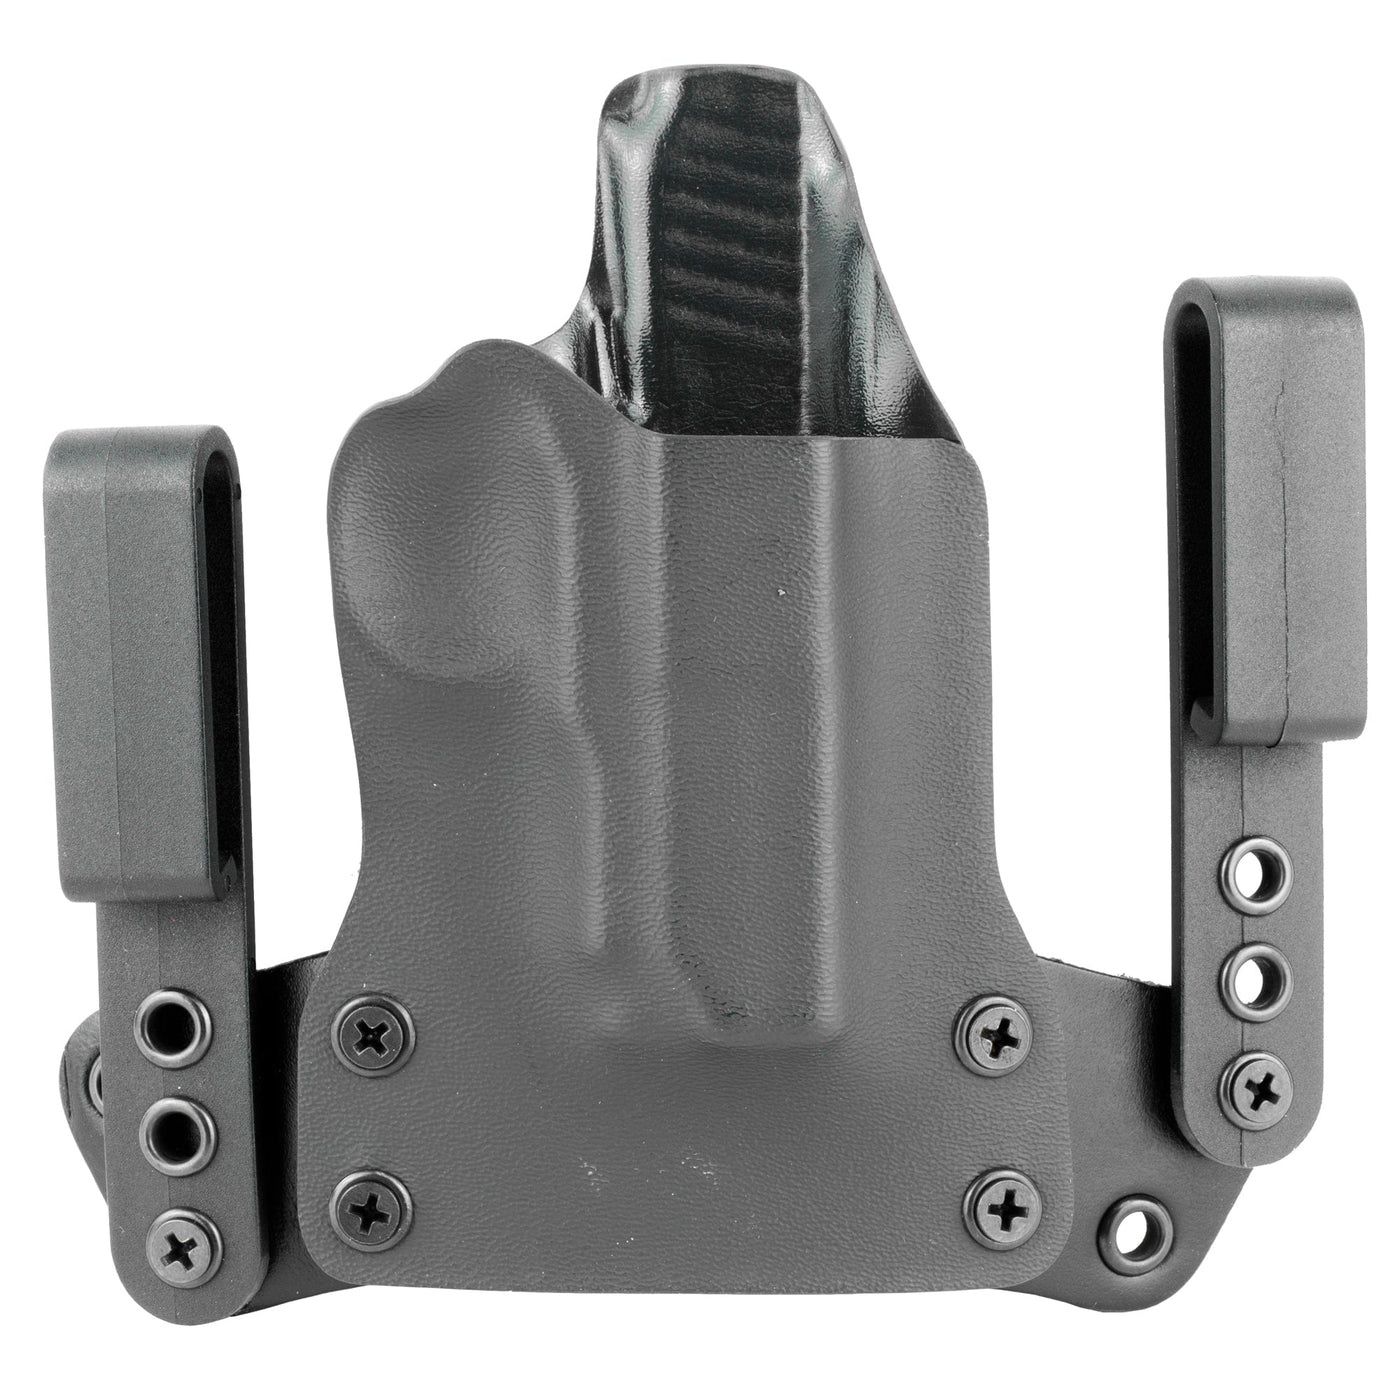 BlackPoint Tactical Blk Pnt Mini Wing Sig P238 Rh Blk Holsters